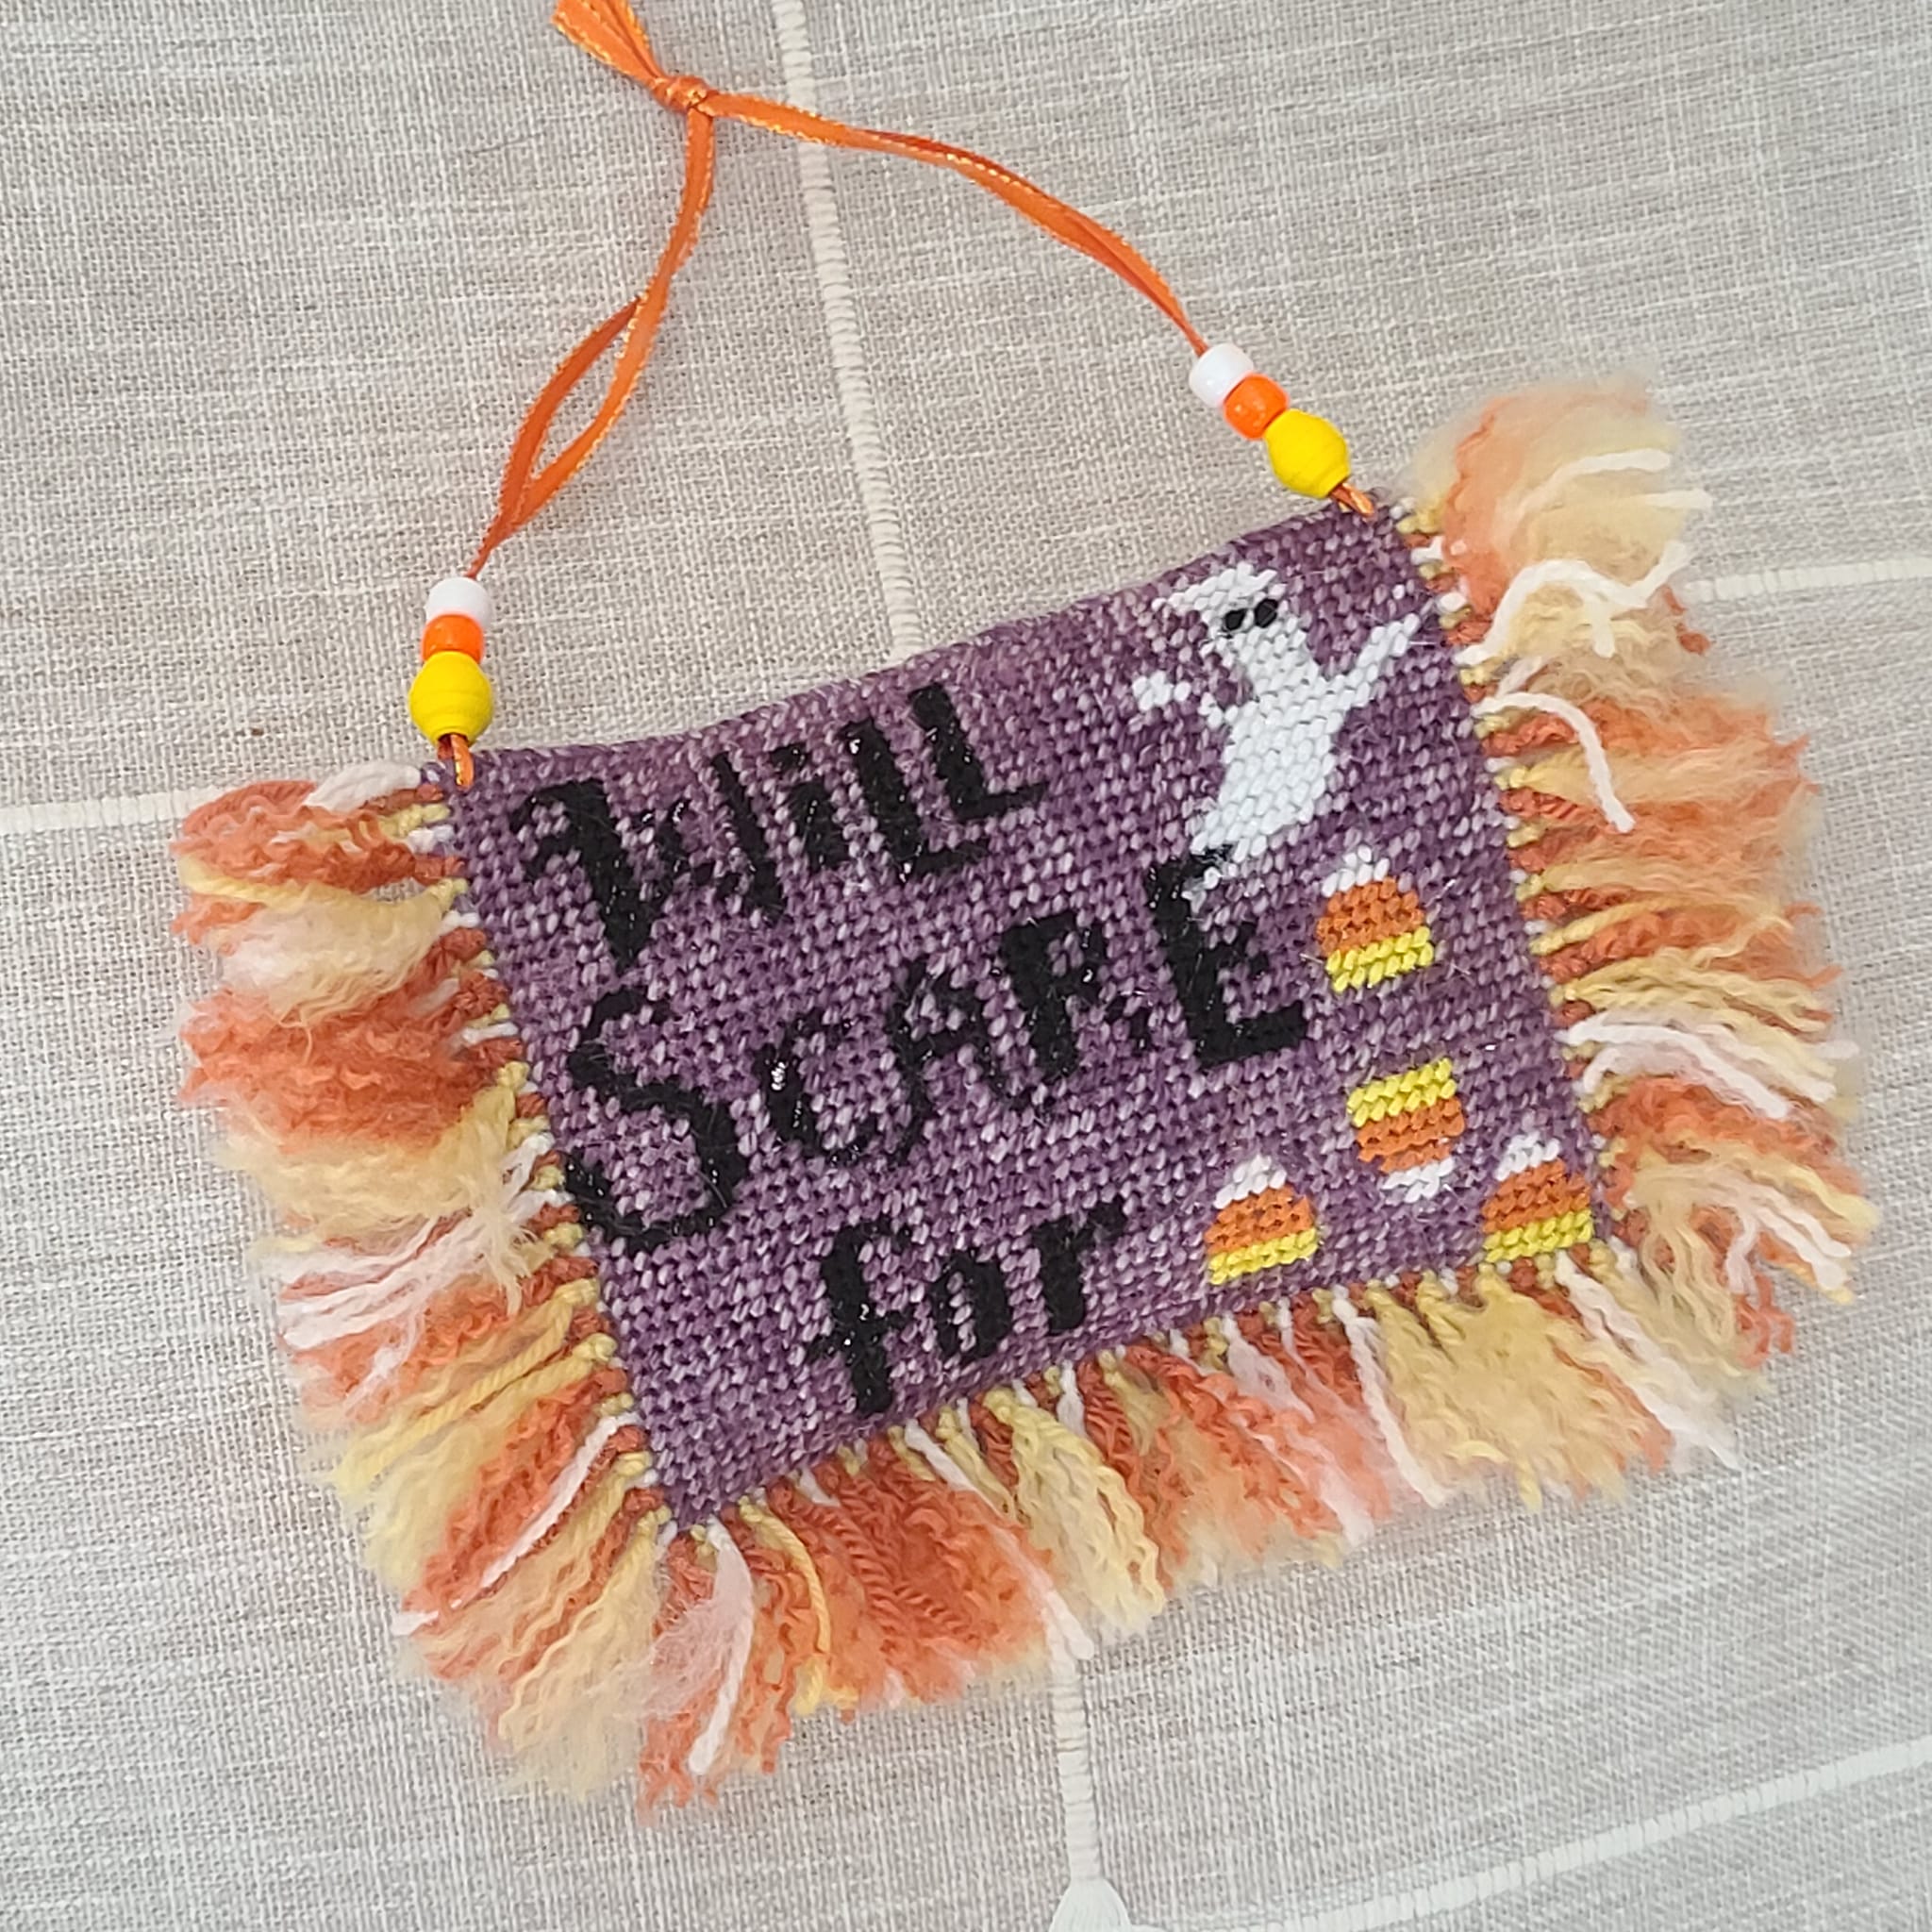 Halloween needlepoint WILL SCARE FOR CANDY CORN with fringe